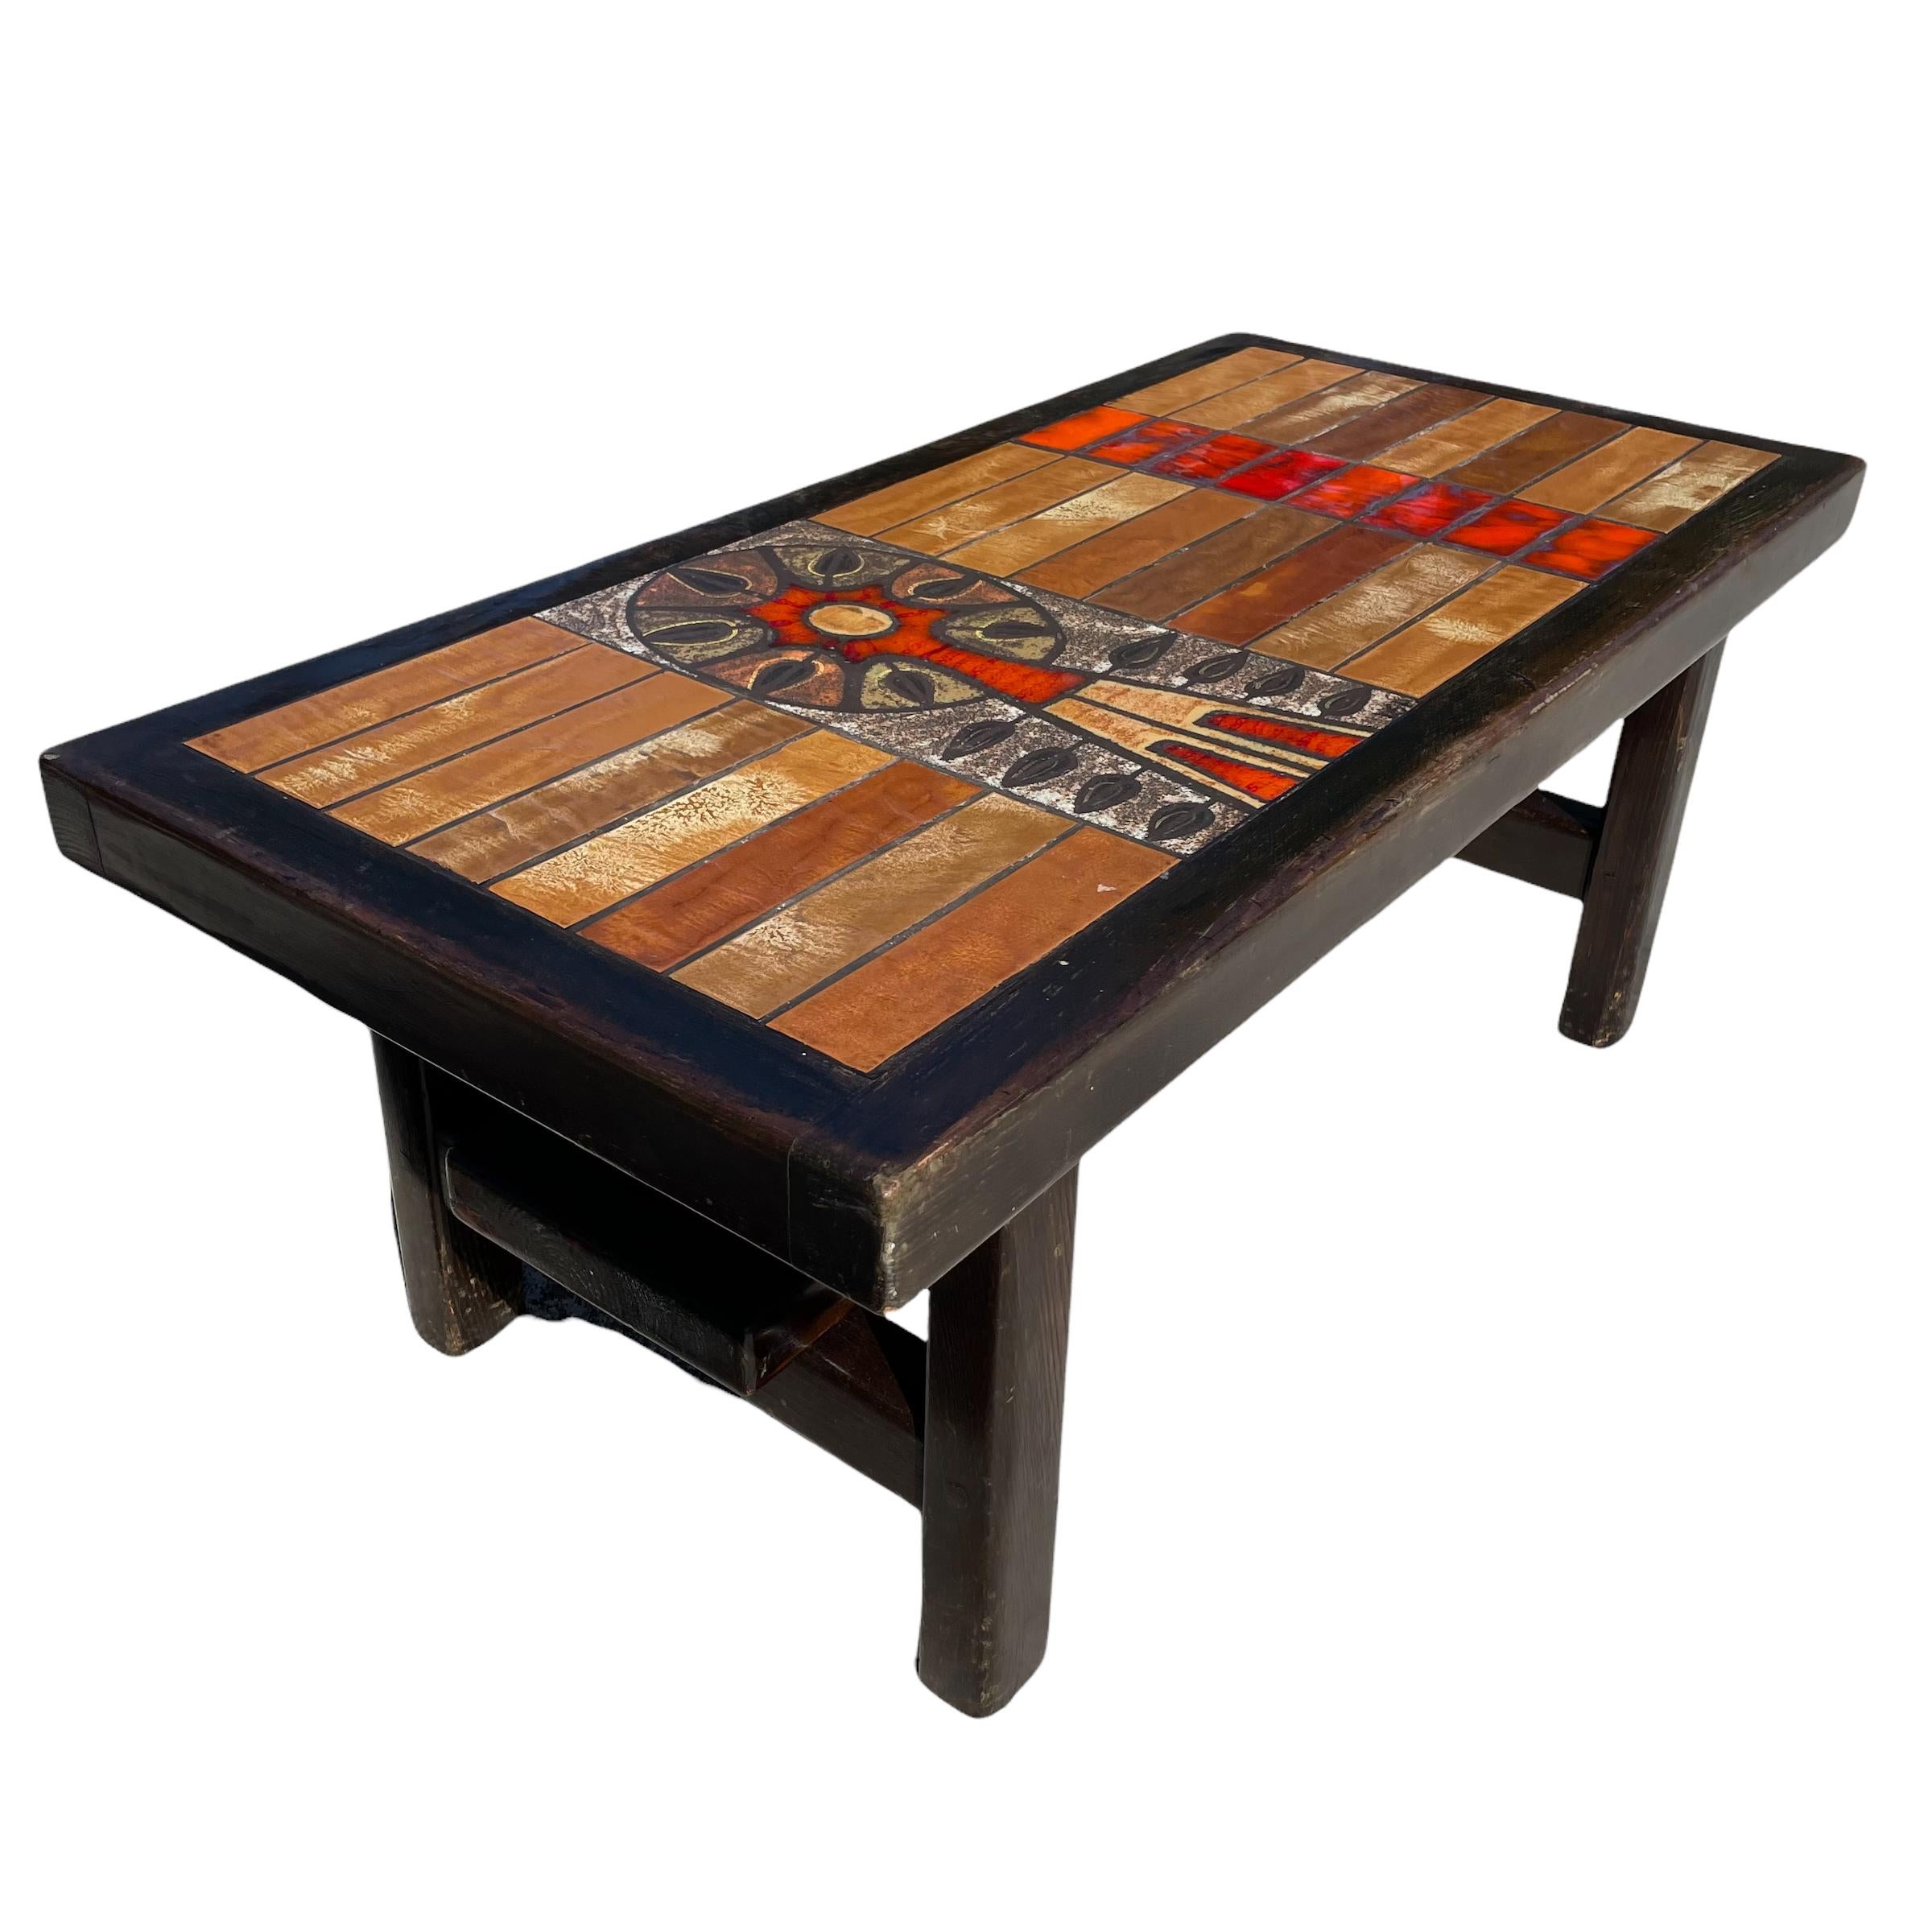 Coffee table in colored ceramic in light brown and red tones with artistic representation reflecting the style of the 1960s, base, contour, and footrest in dark wood.